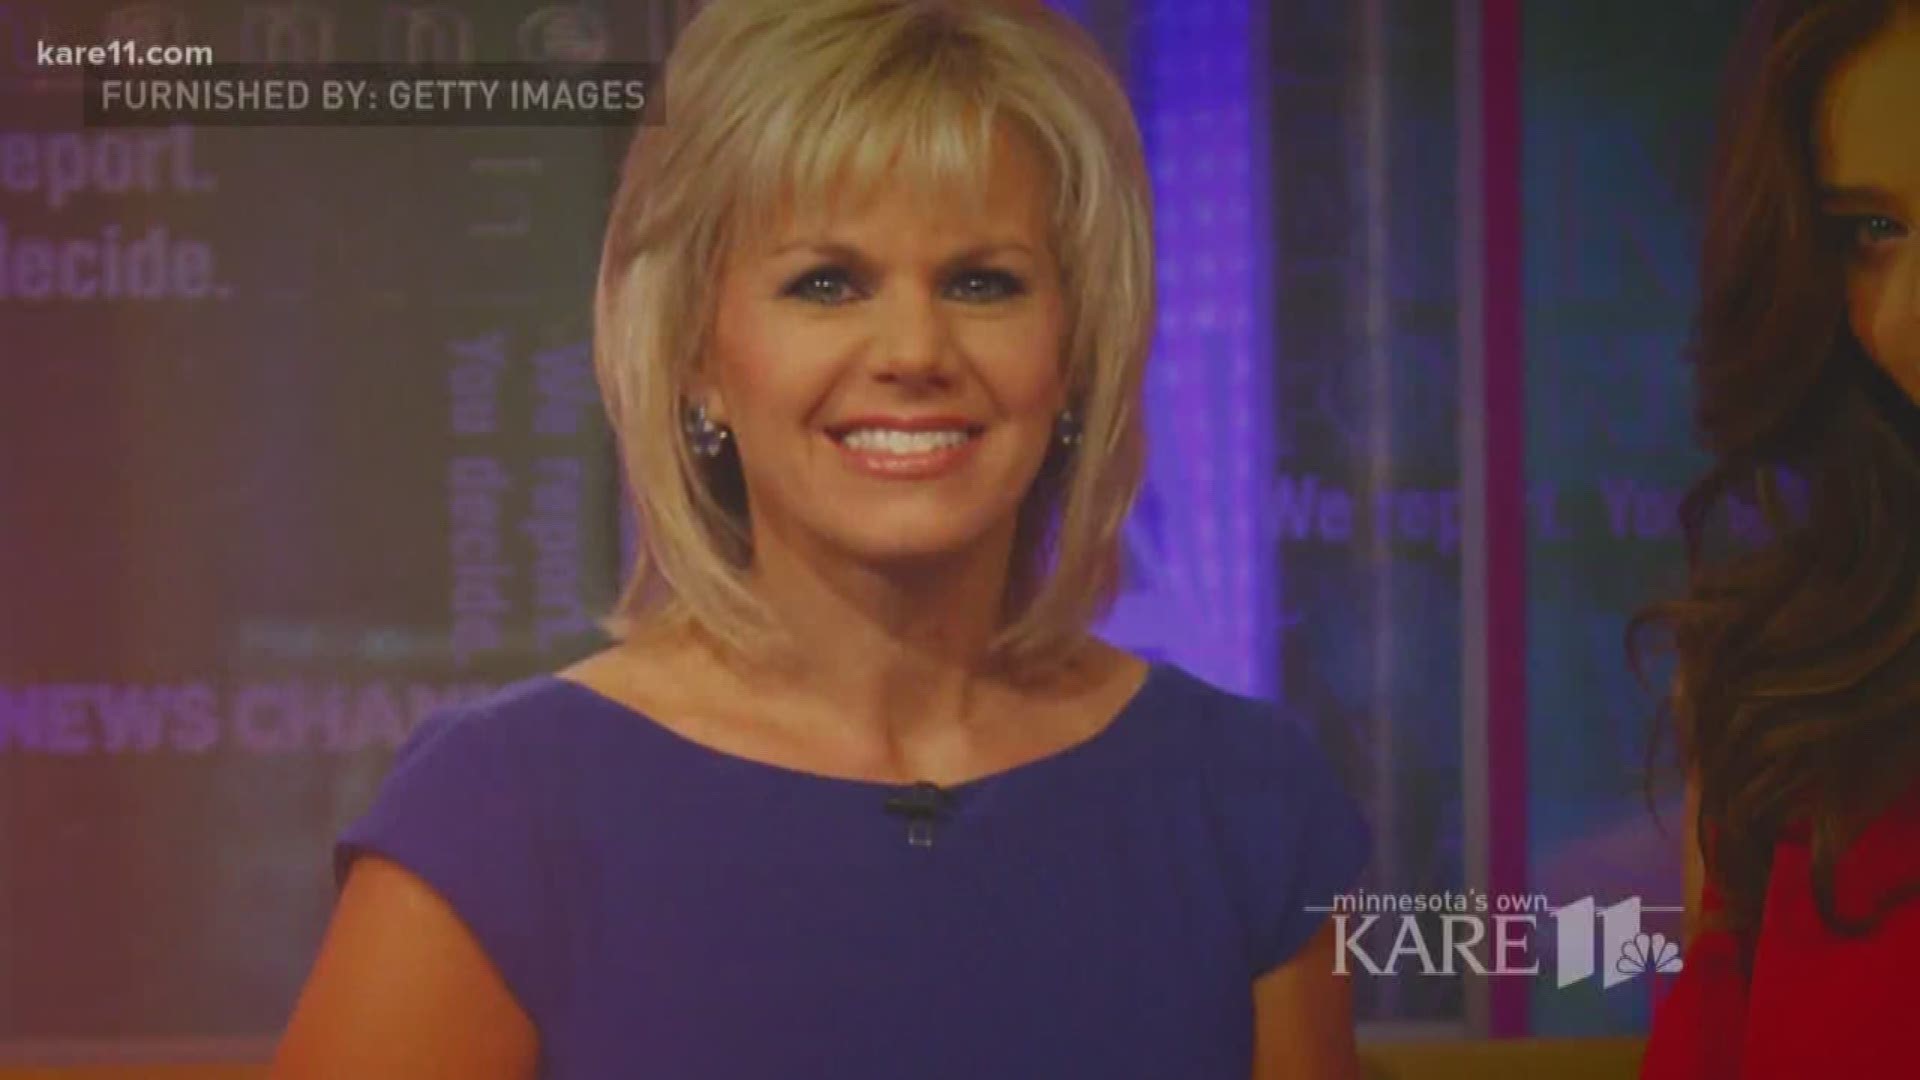 Fifteen months ago, Minnesota native Gretchen Carlson, sued her powerful boss, Roger Ailes, at Fox News for sexual discrimination. Carlson sat down with KARE 11's Julie Nelson to talk about what came next: a new purpose, and a new book. http://kare11.tv/2